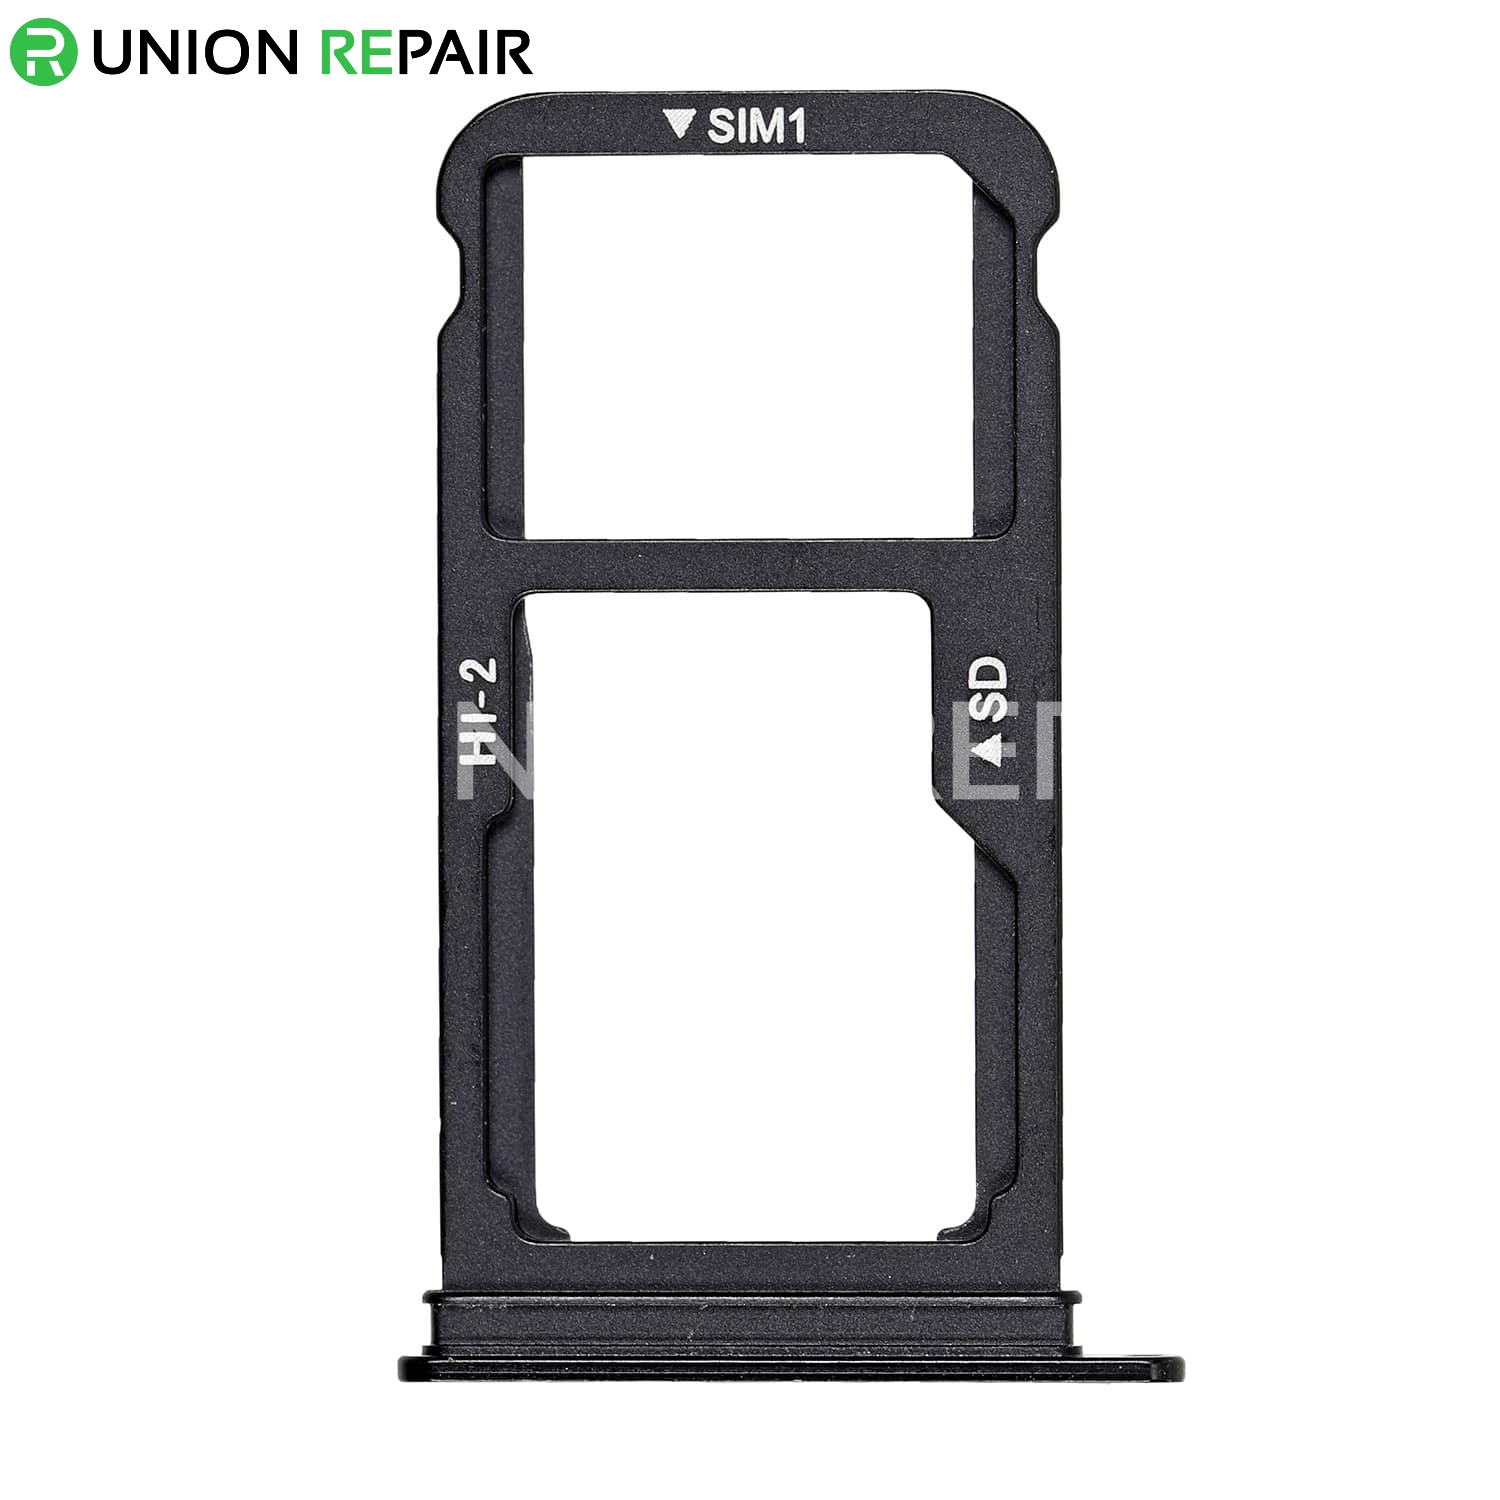 Replacement for Huawei Mate 10 SIM Card Tray - Black